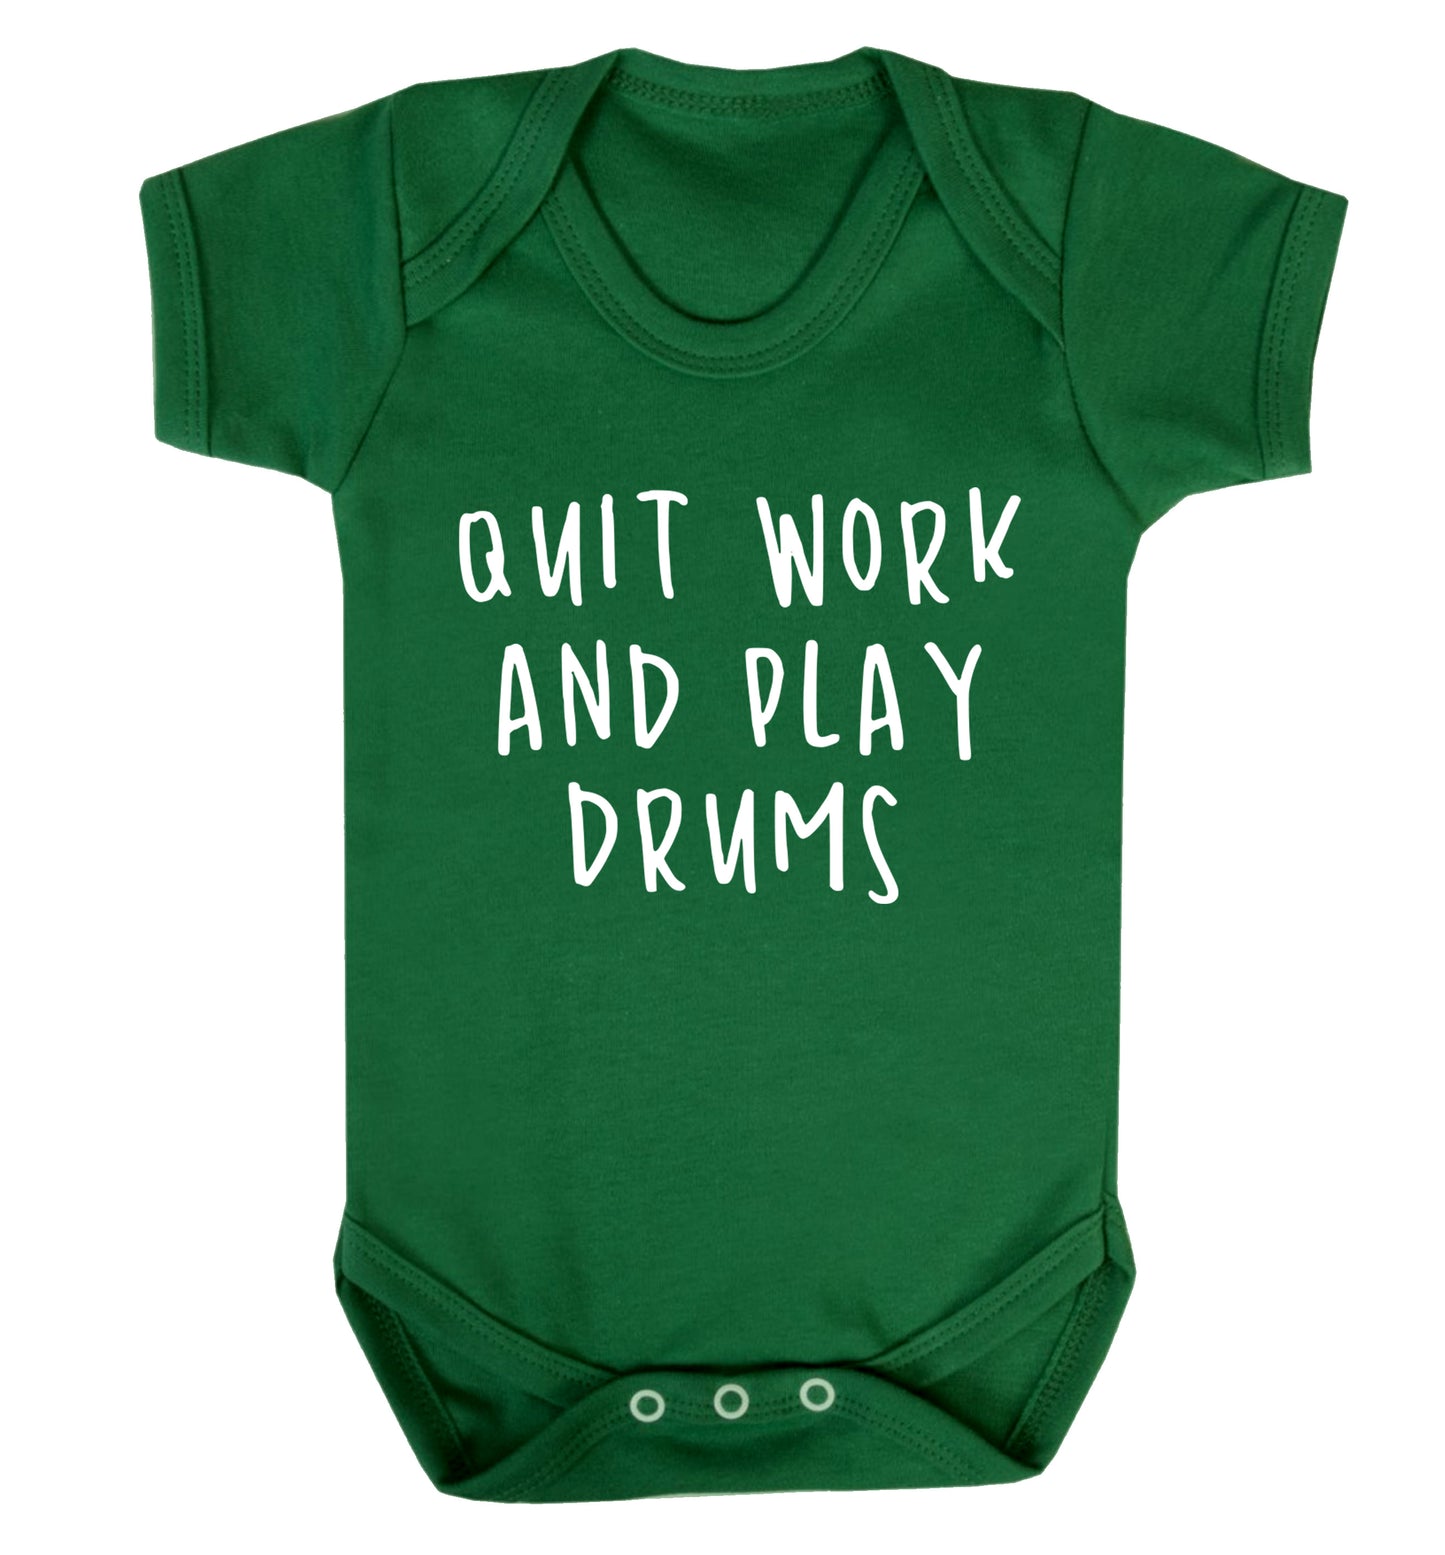 Quit work and play drums Baby Vest green 18-24 months